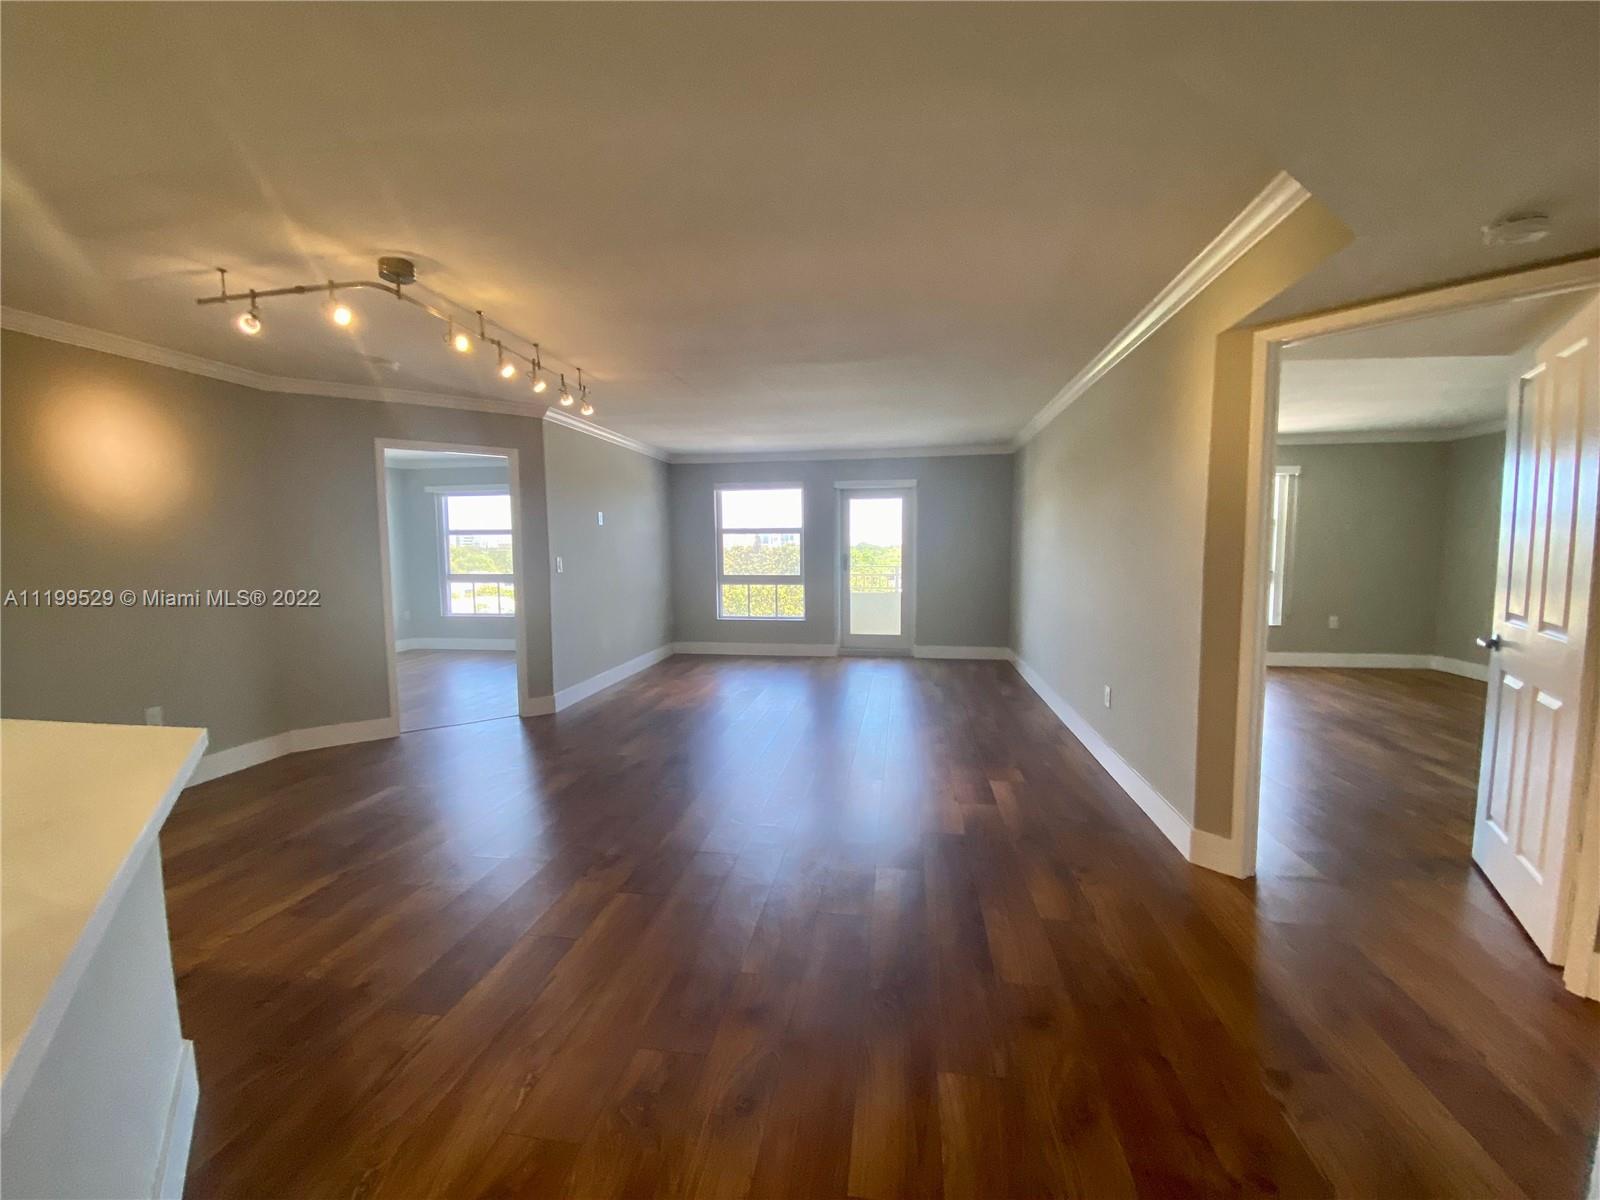 a view of wooden floor and windows in an empty room